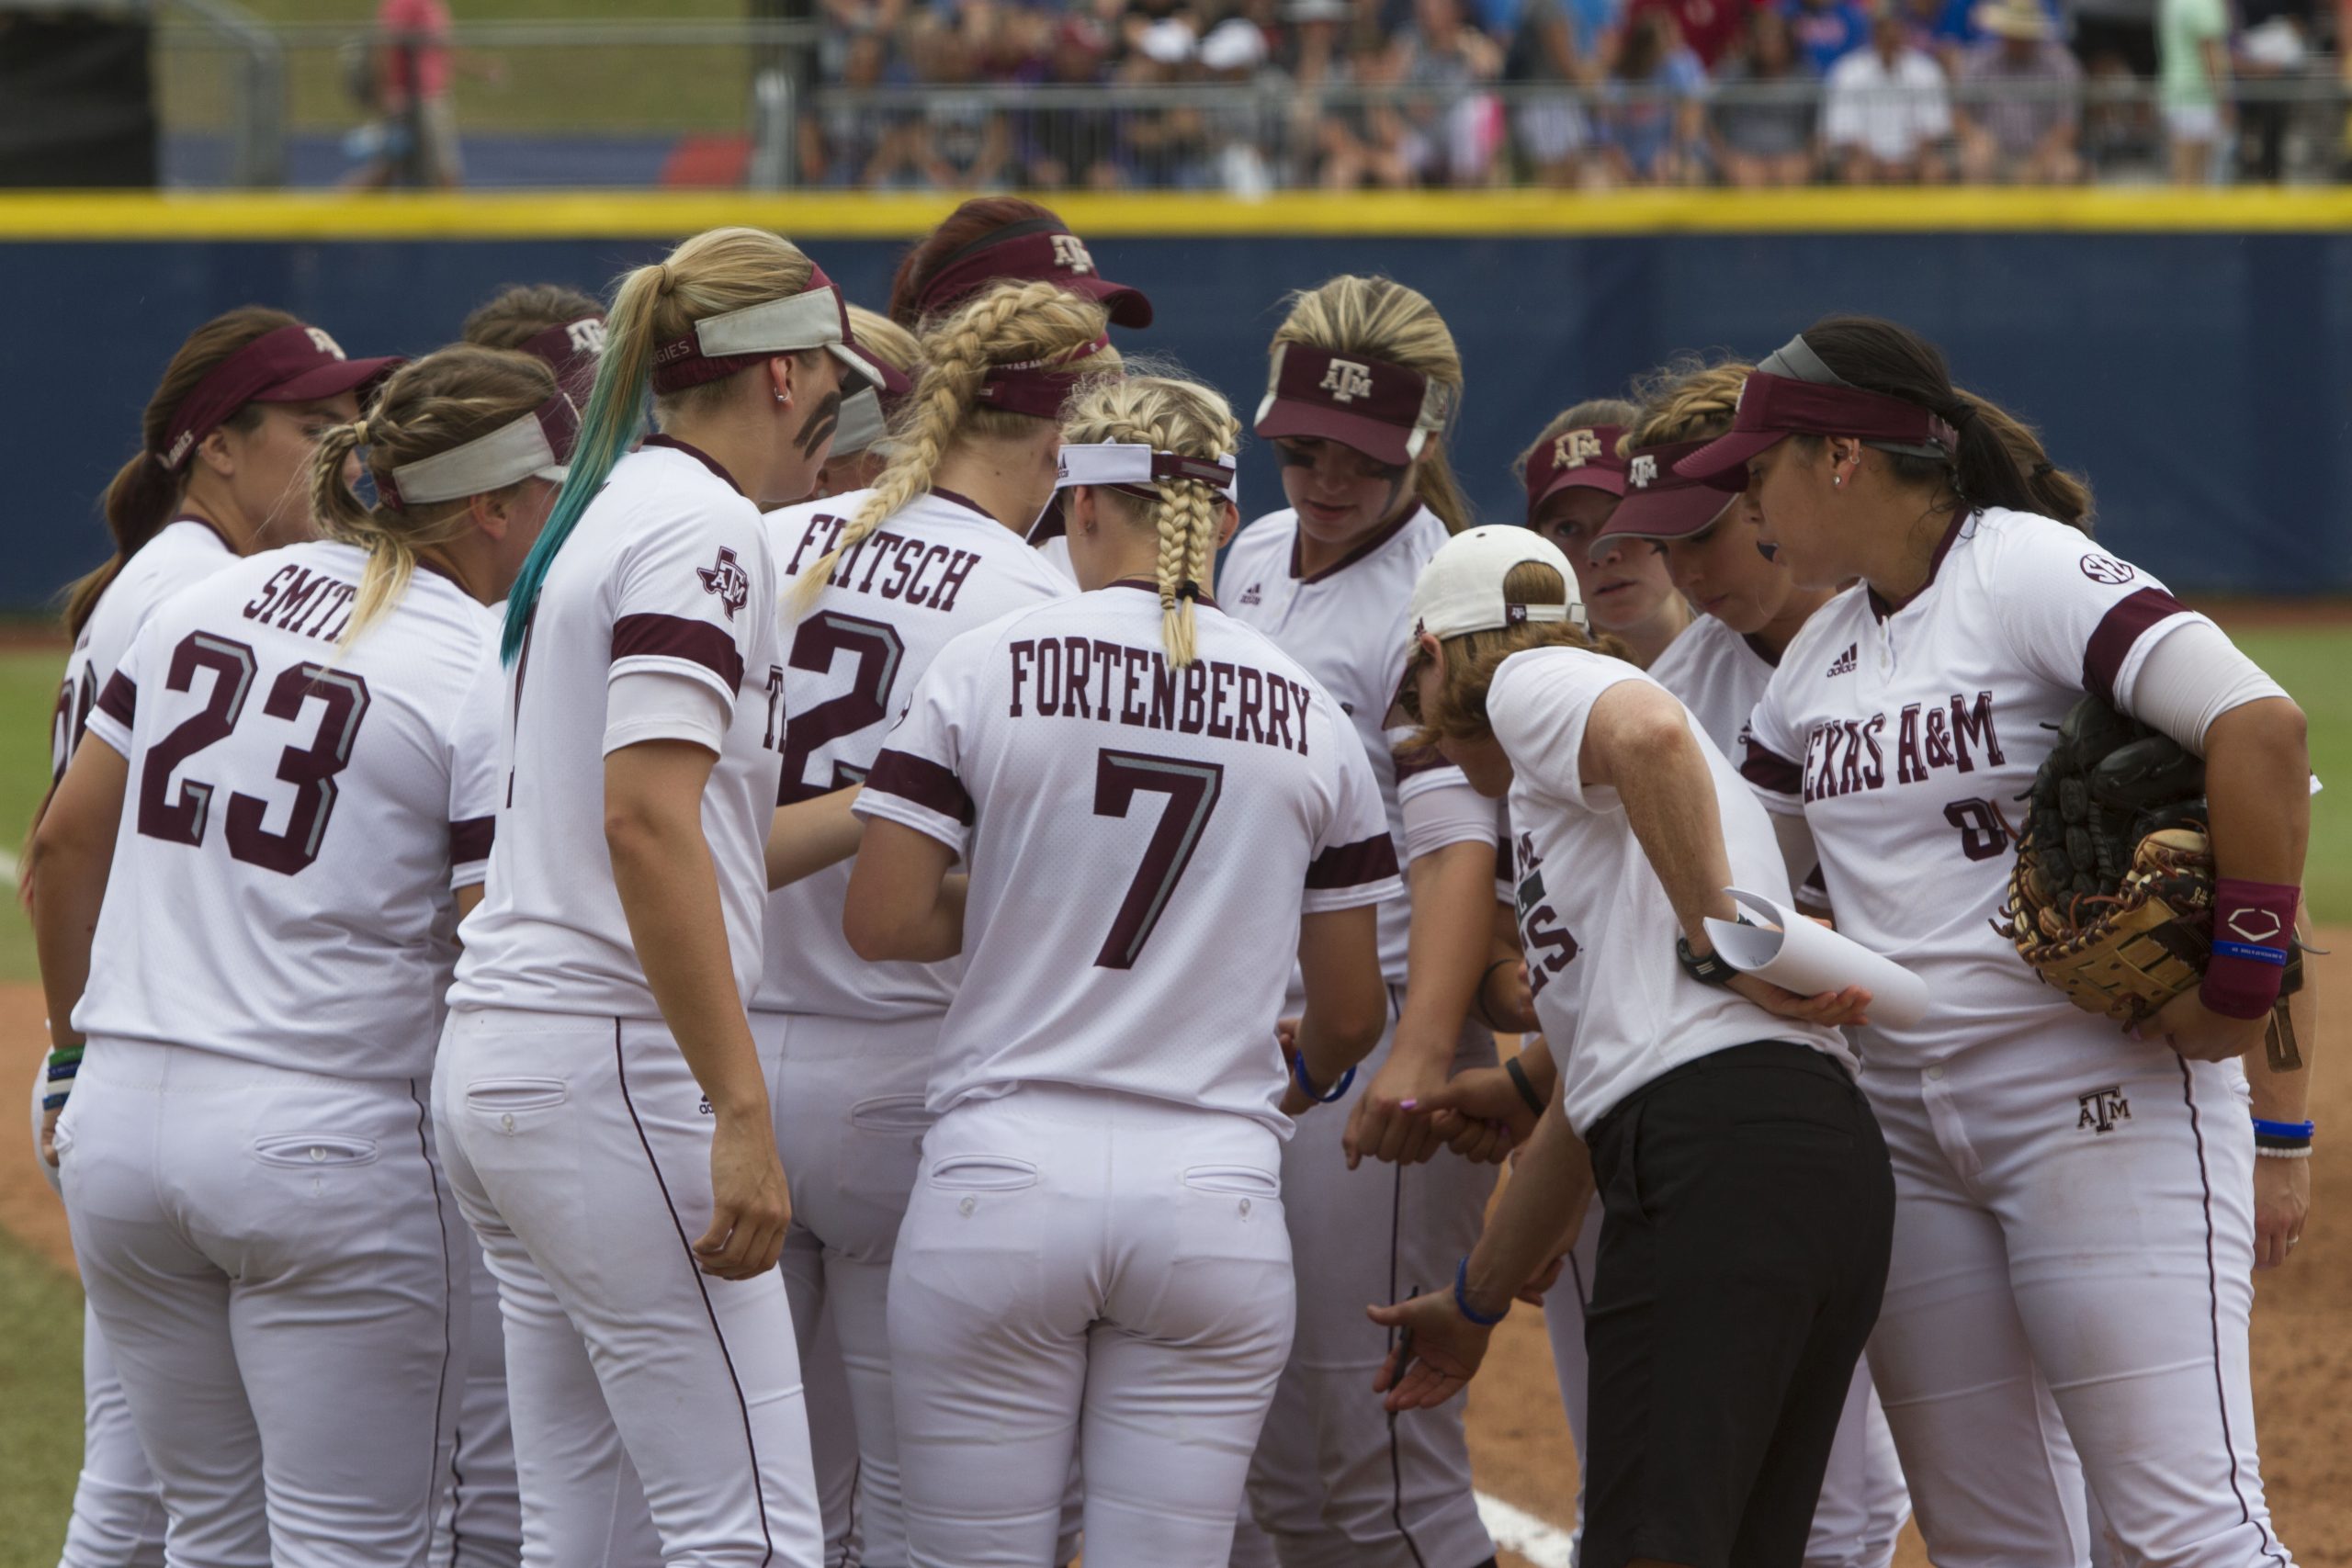 Photo+Gallery%3A+Texas+A%26M+falls+to+UCLA+in+Womens+College+World+Series